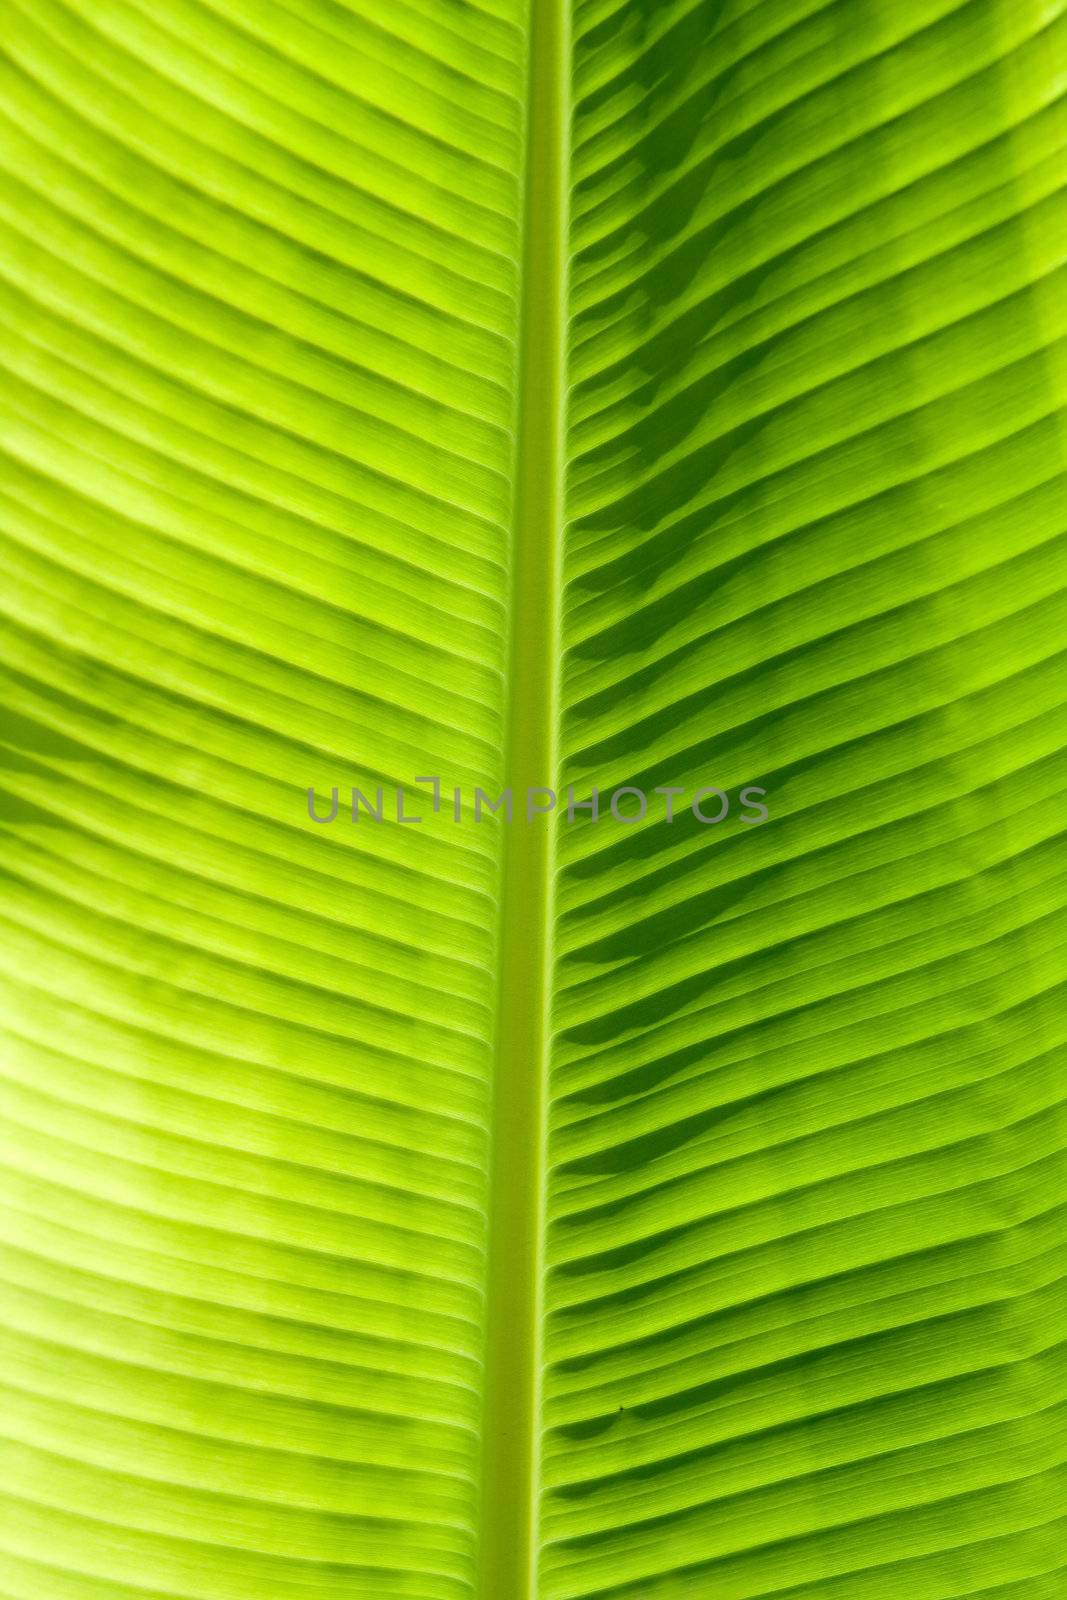 Green leaf texture showing all nerves; Chloroplast with chlorophyll giving color to leaf and used for photosynthesis.